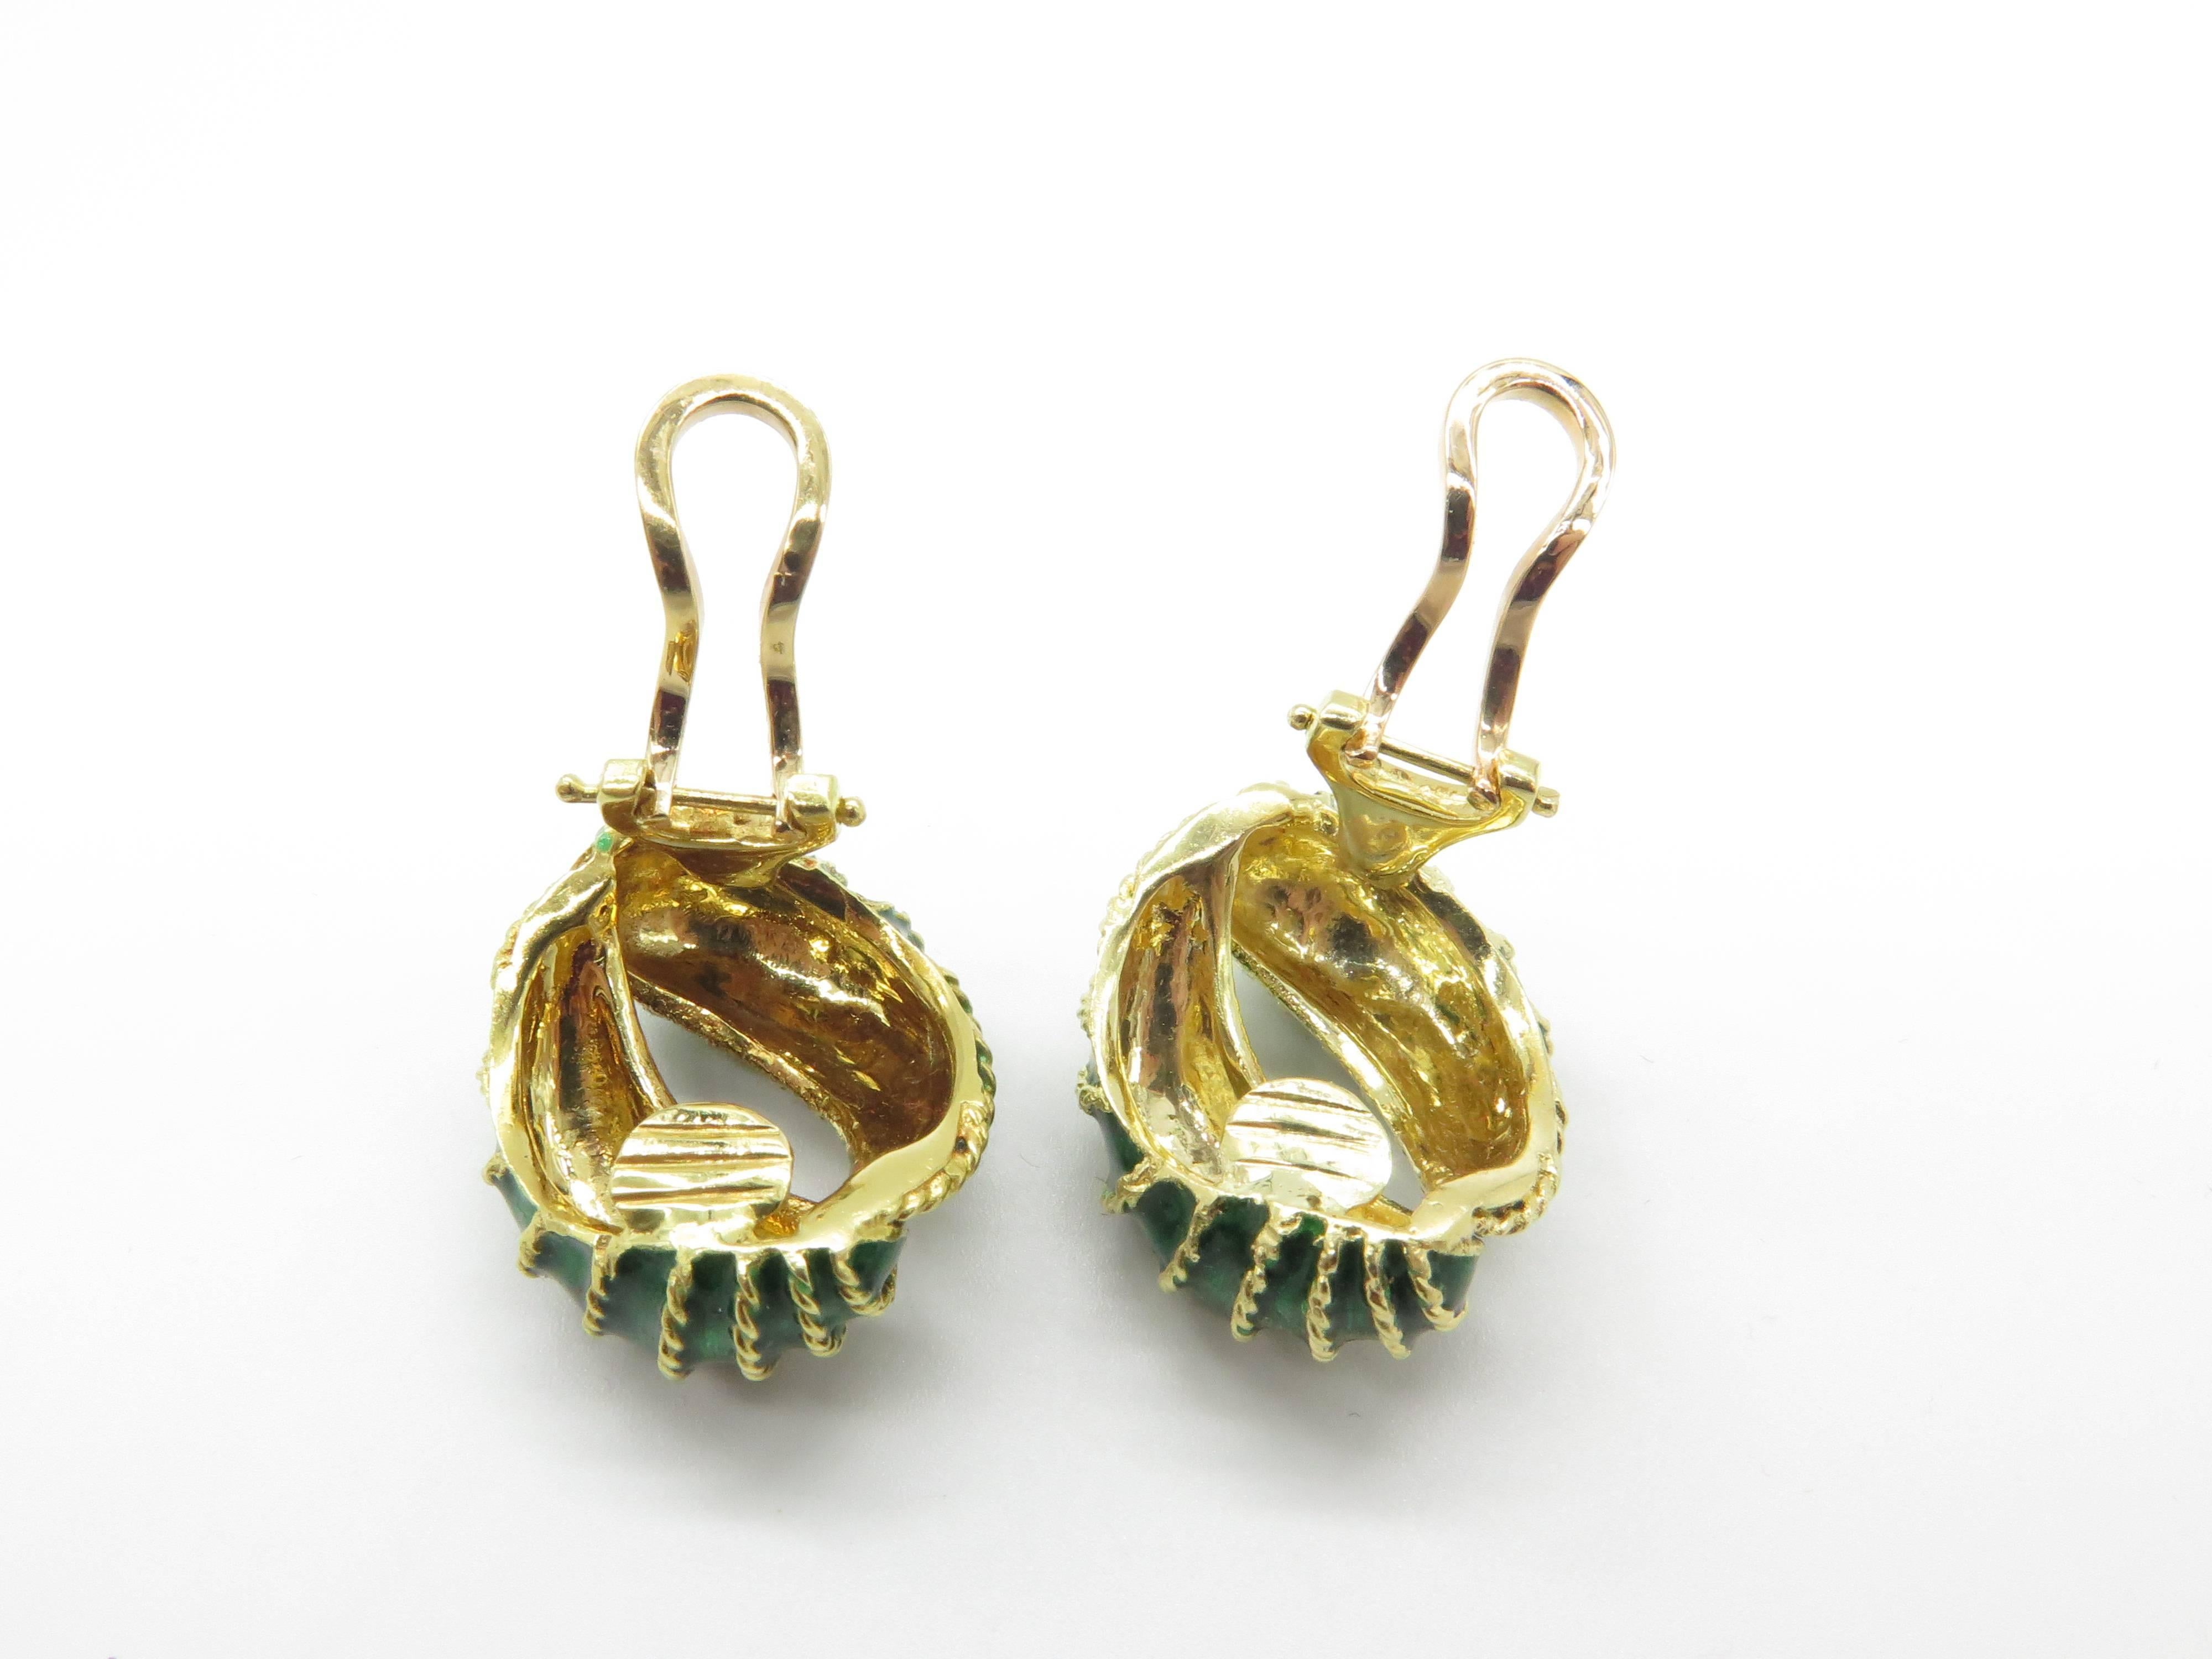 18k Yellow Gold Green Enamel Earrings. These 1950's earrings are made for non pierced ears but can be easily converted for pierced ears. Measurements: 24 x 20mm, Weight: 23.1 grams. Enamel in Excellent condition.